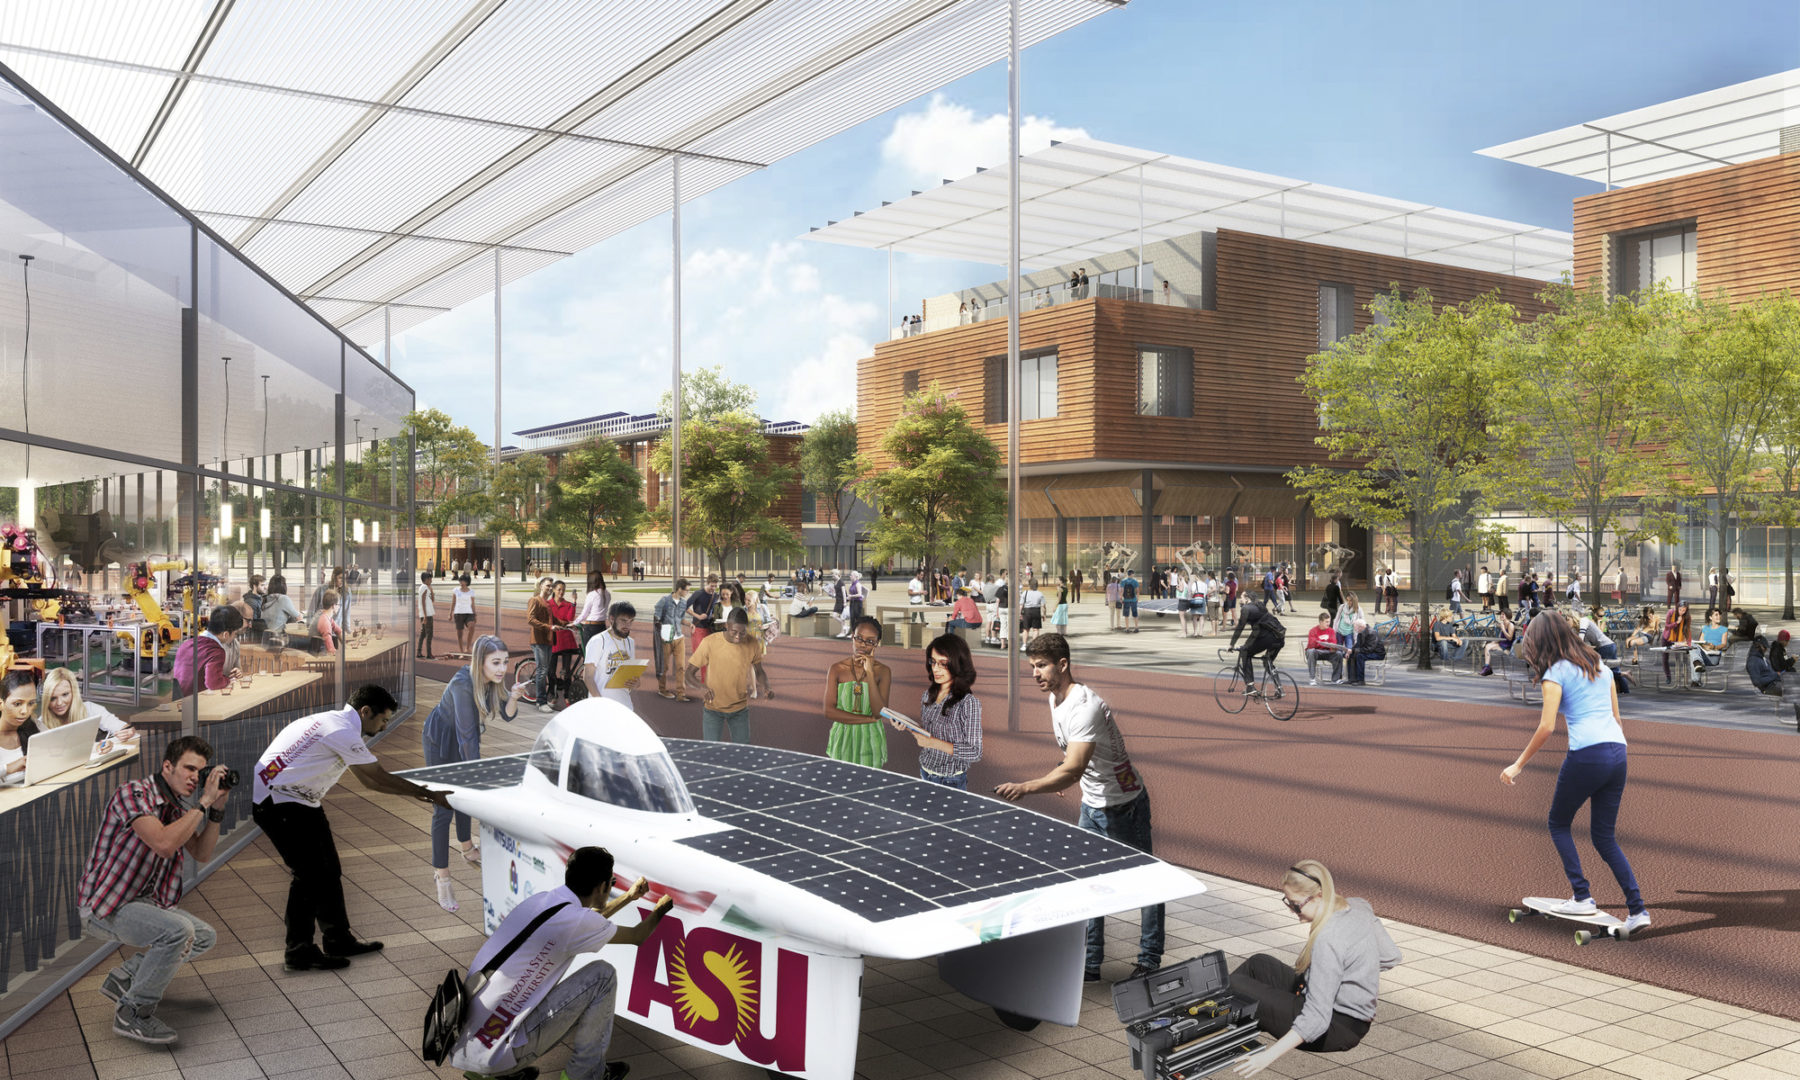 Rendering of a group of students gathered around a solar car